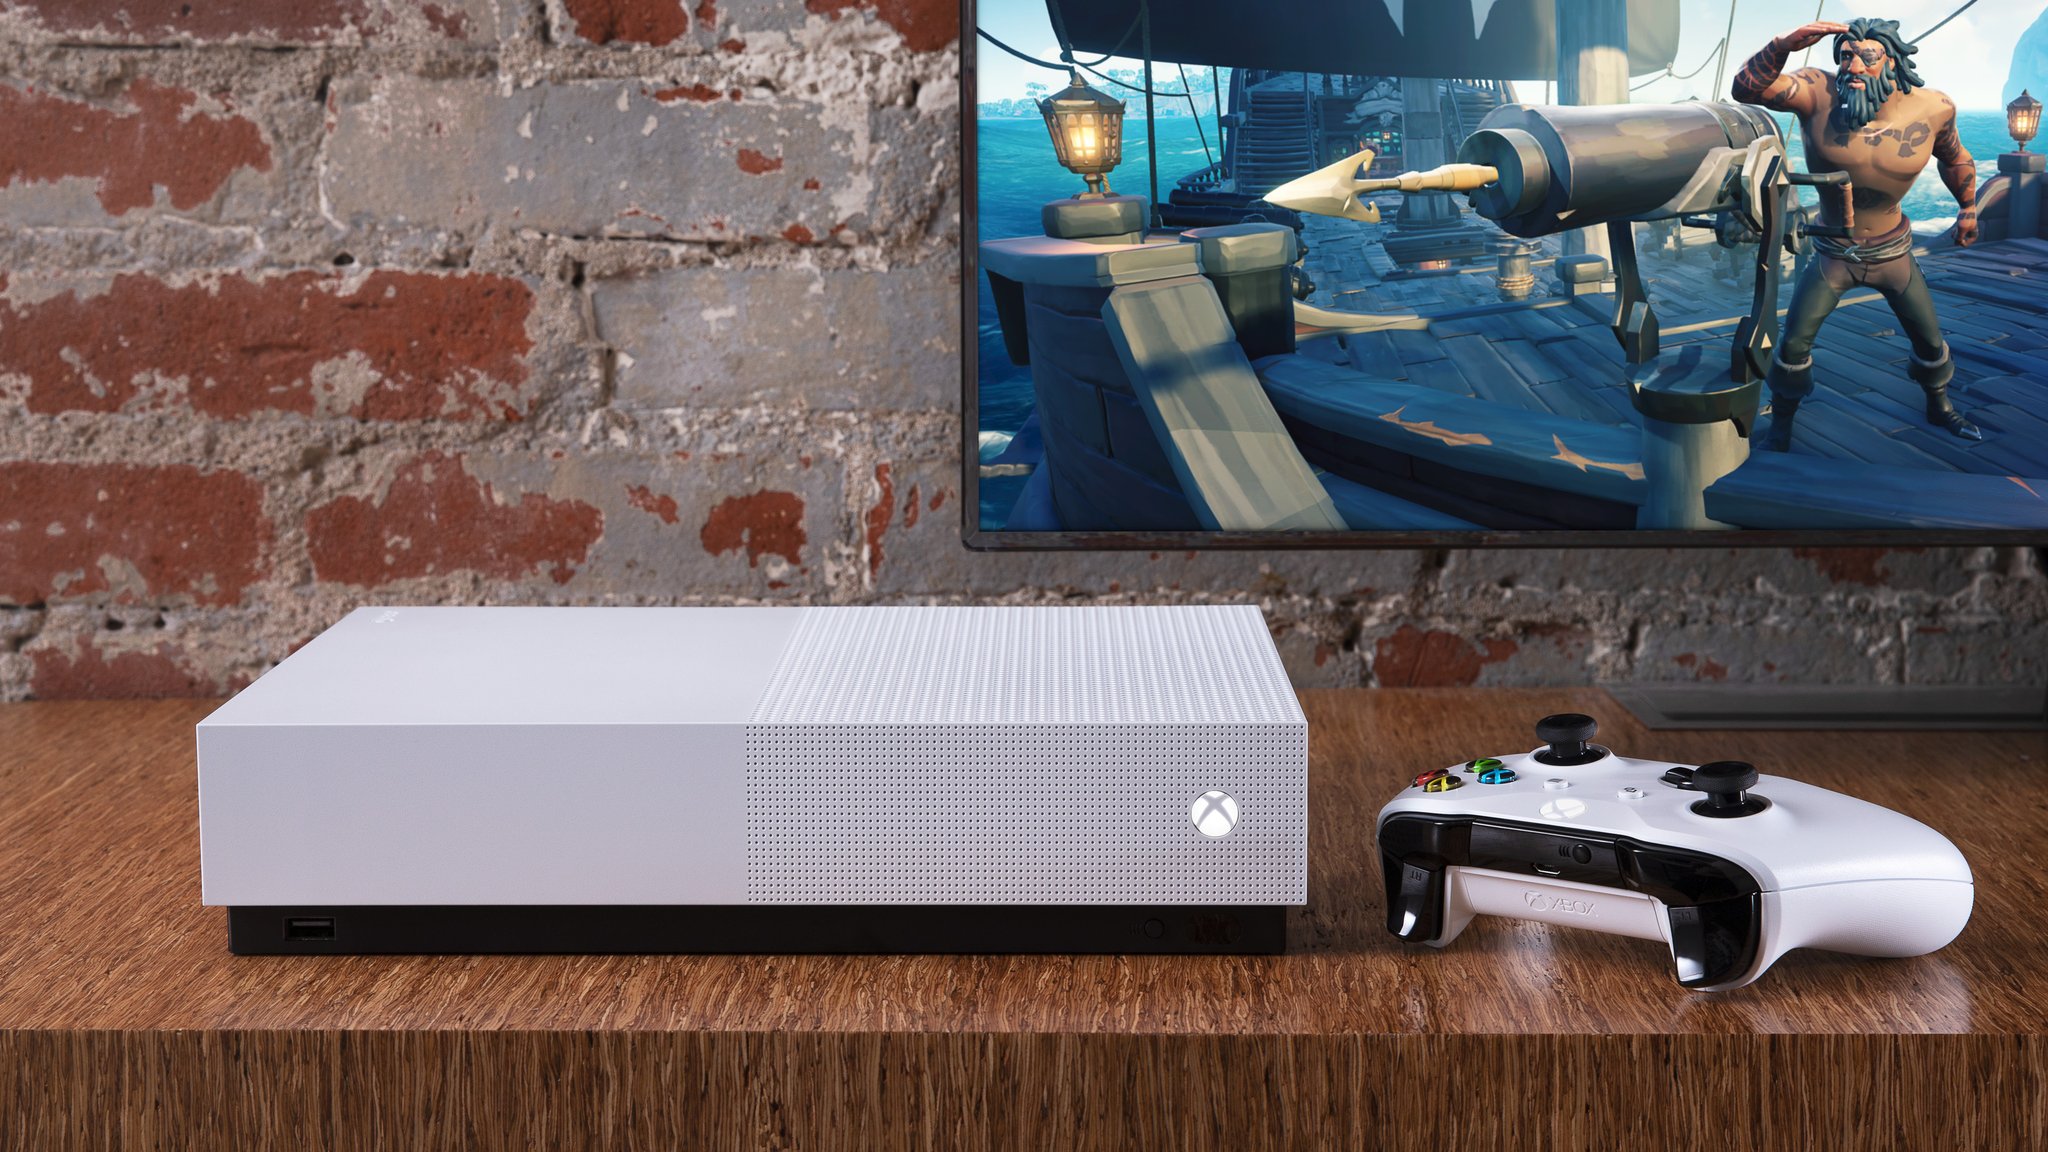 xbox one s digital edition review